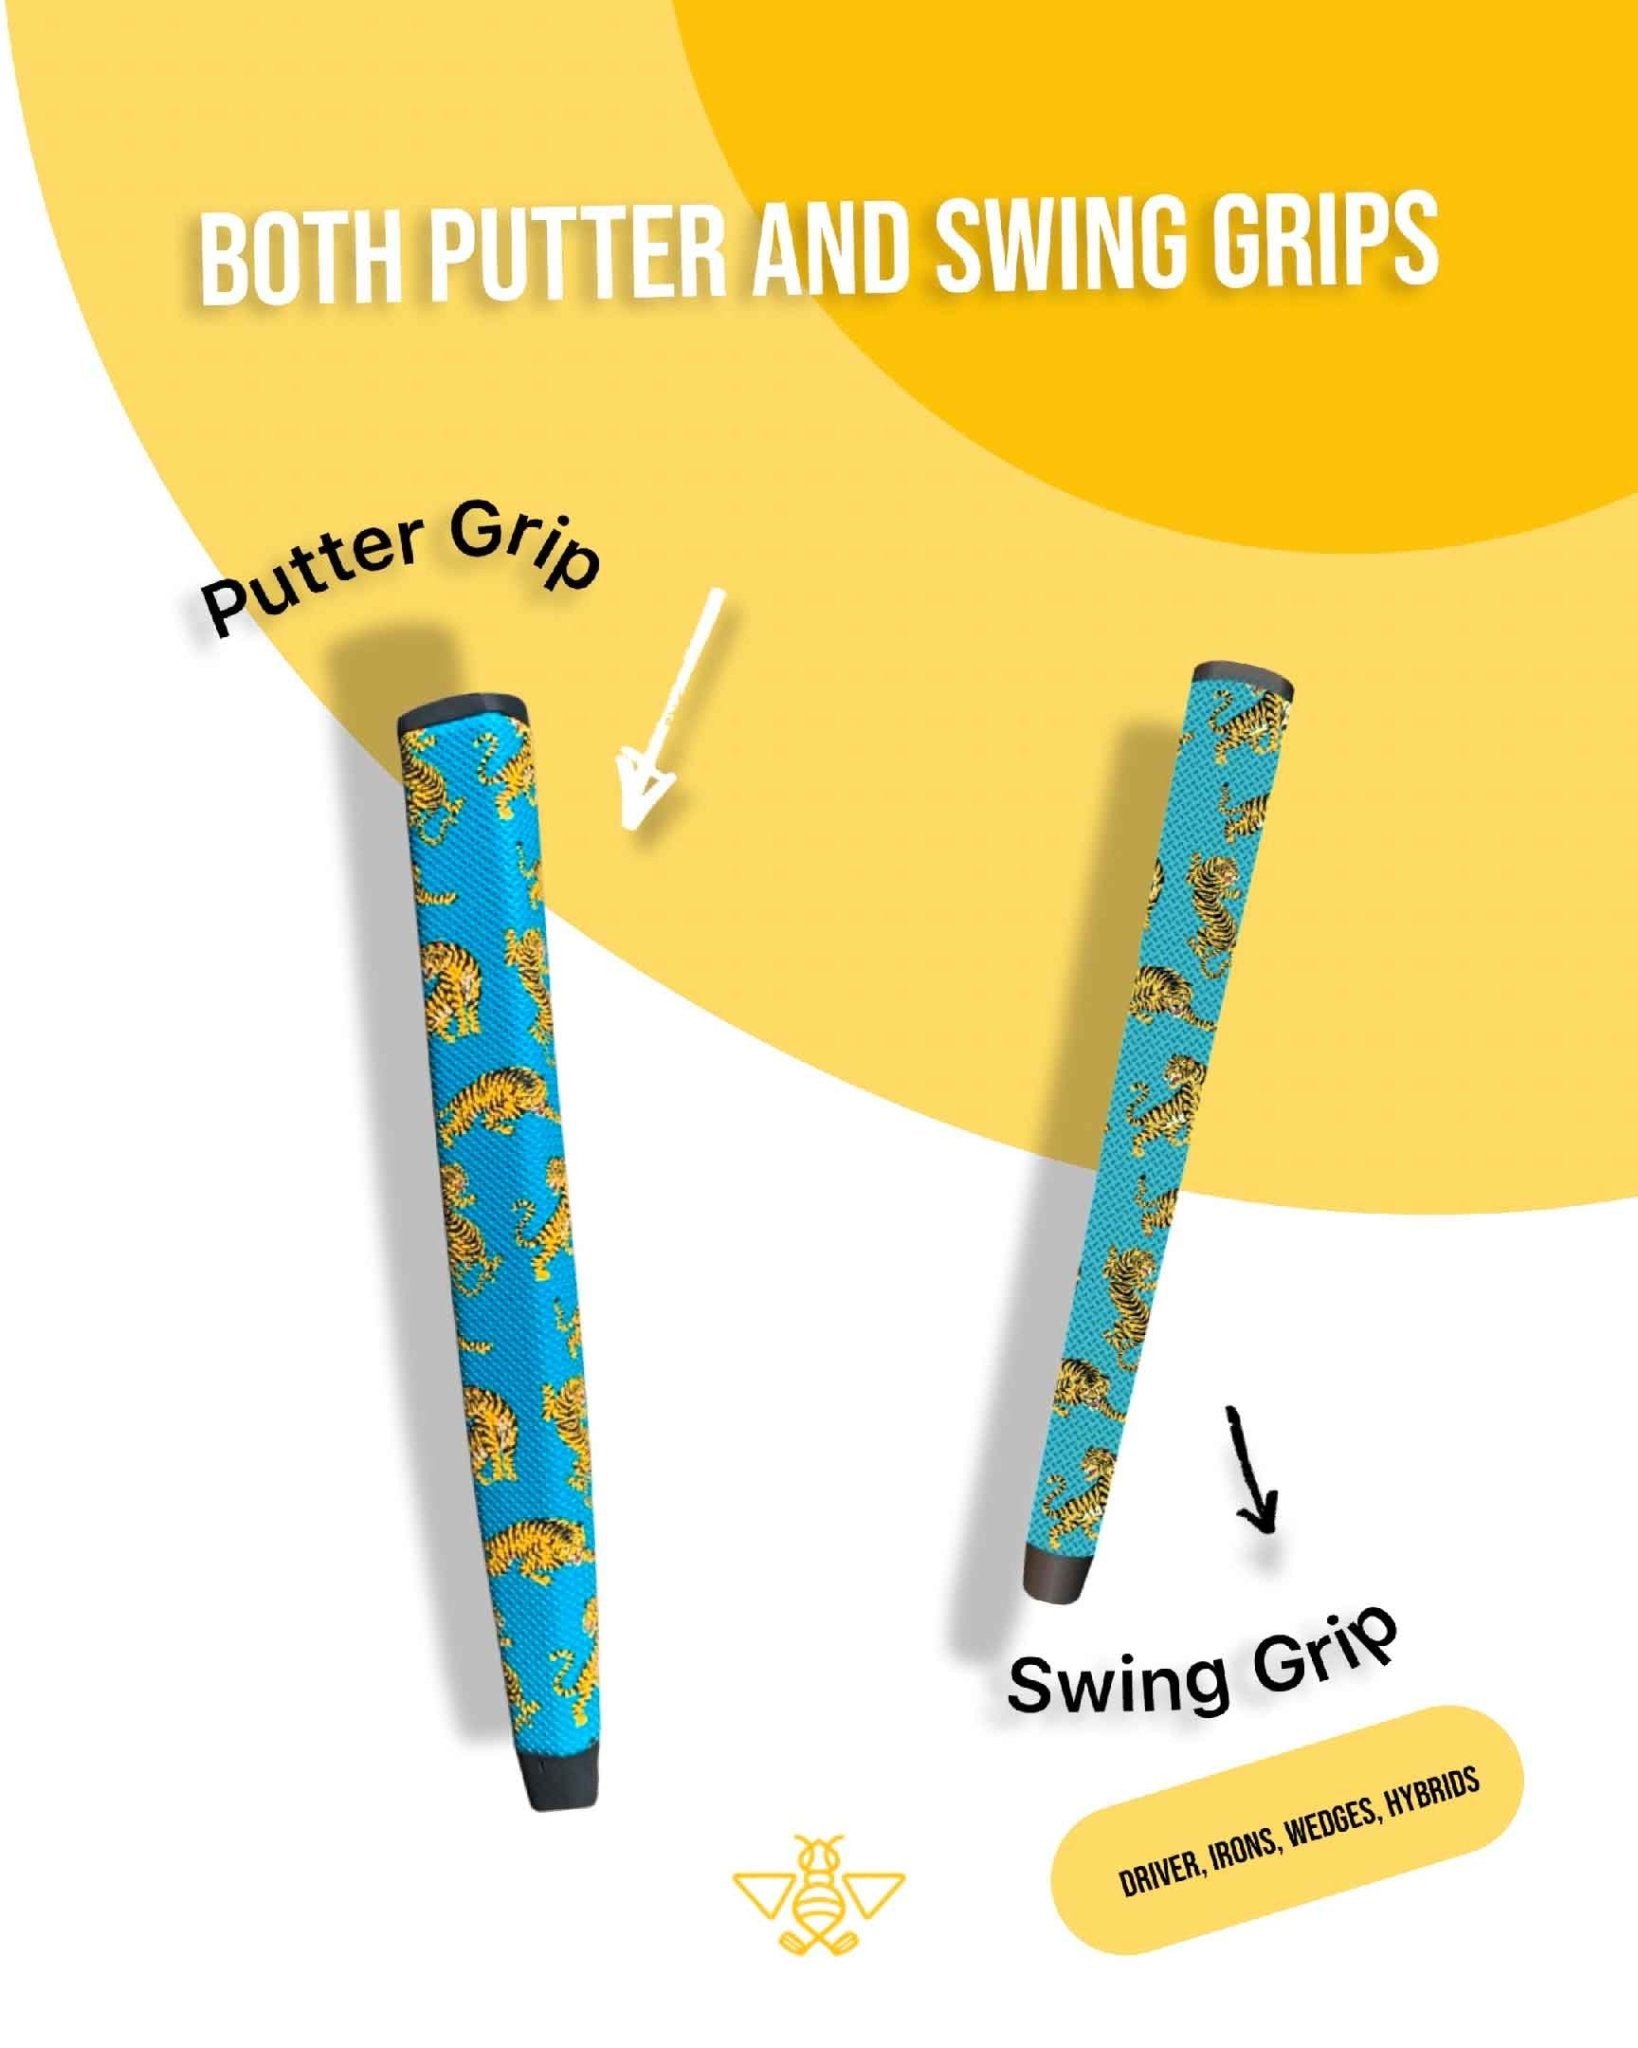 The Dynasty Putter - Stinger Grips